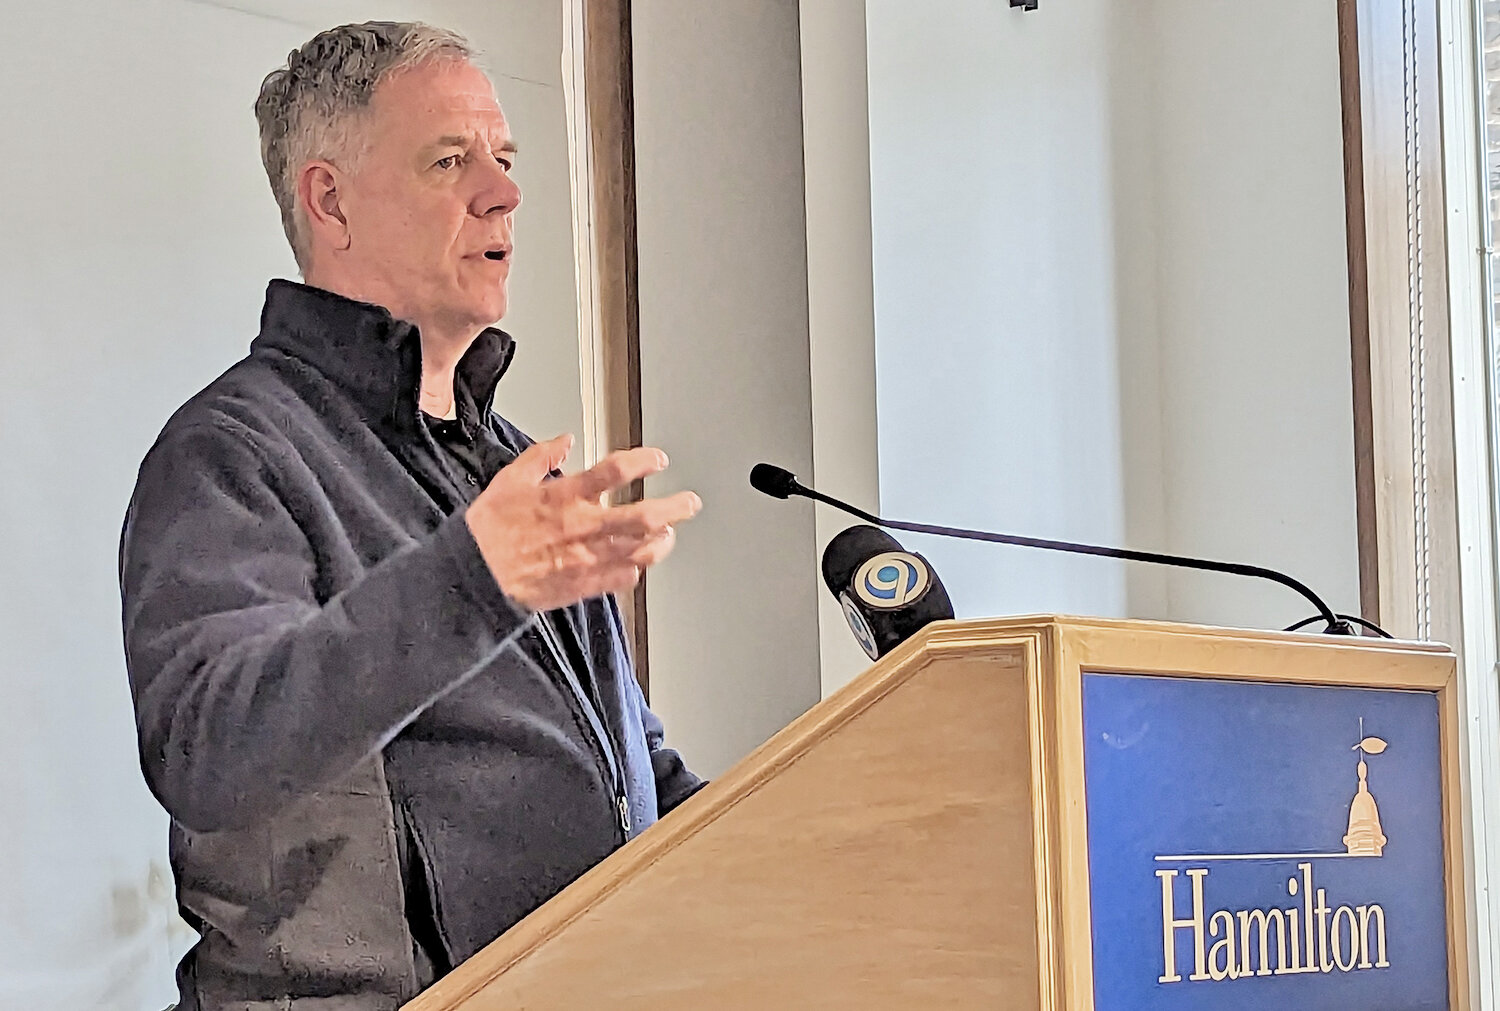 Francis S. Coots, director of public safety for Hamilton College, discusses the school’s response to a social media shooting threat on Sunday.